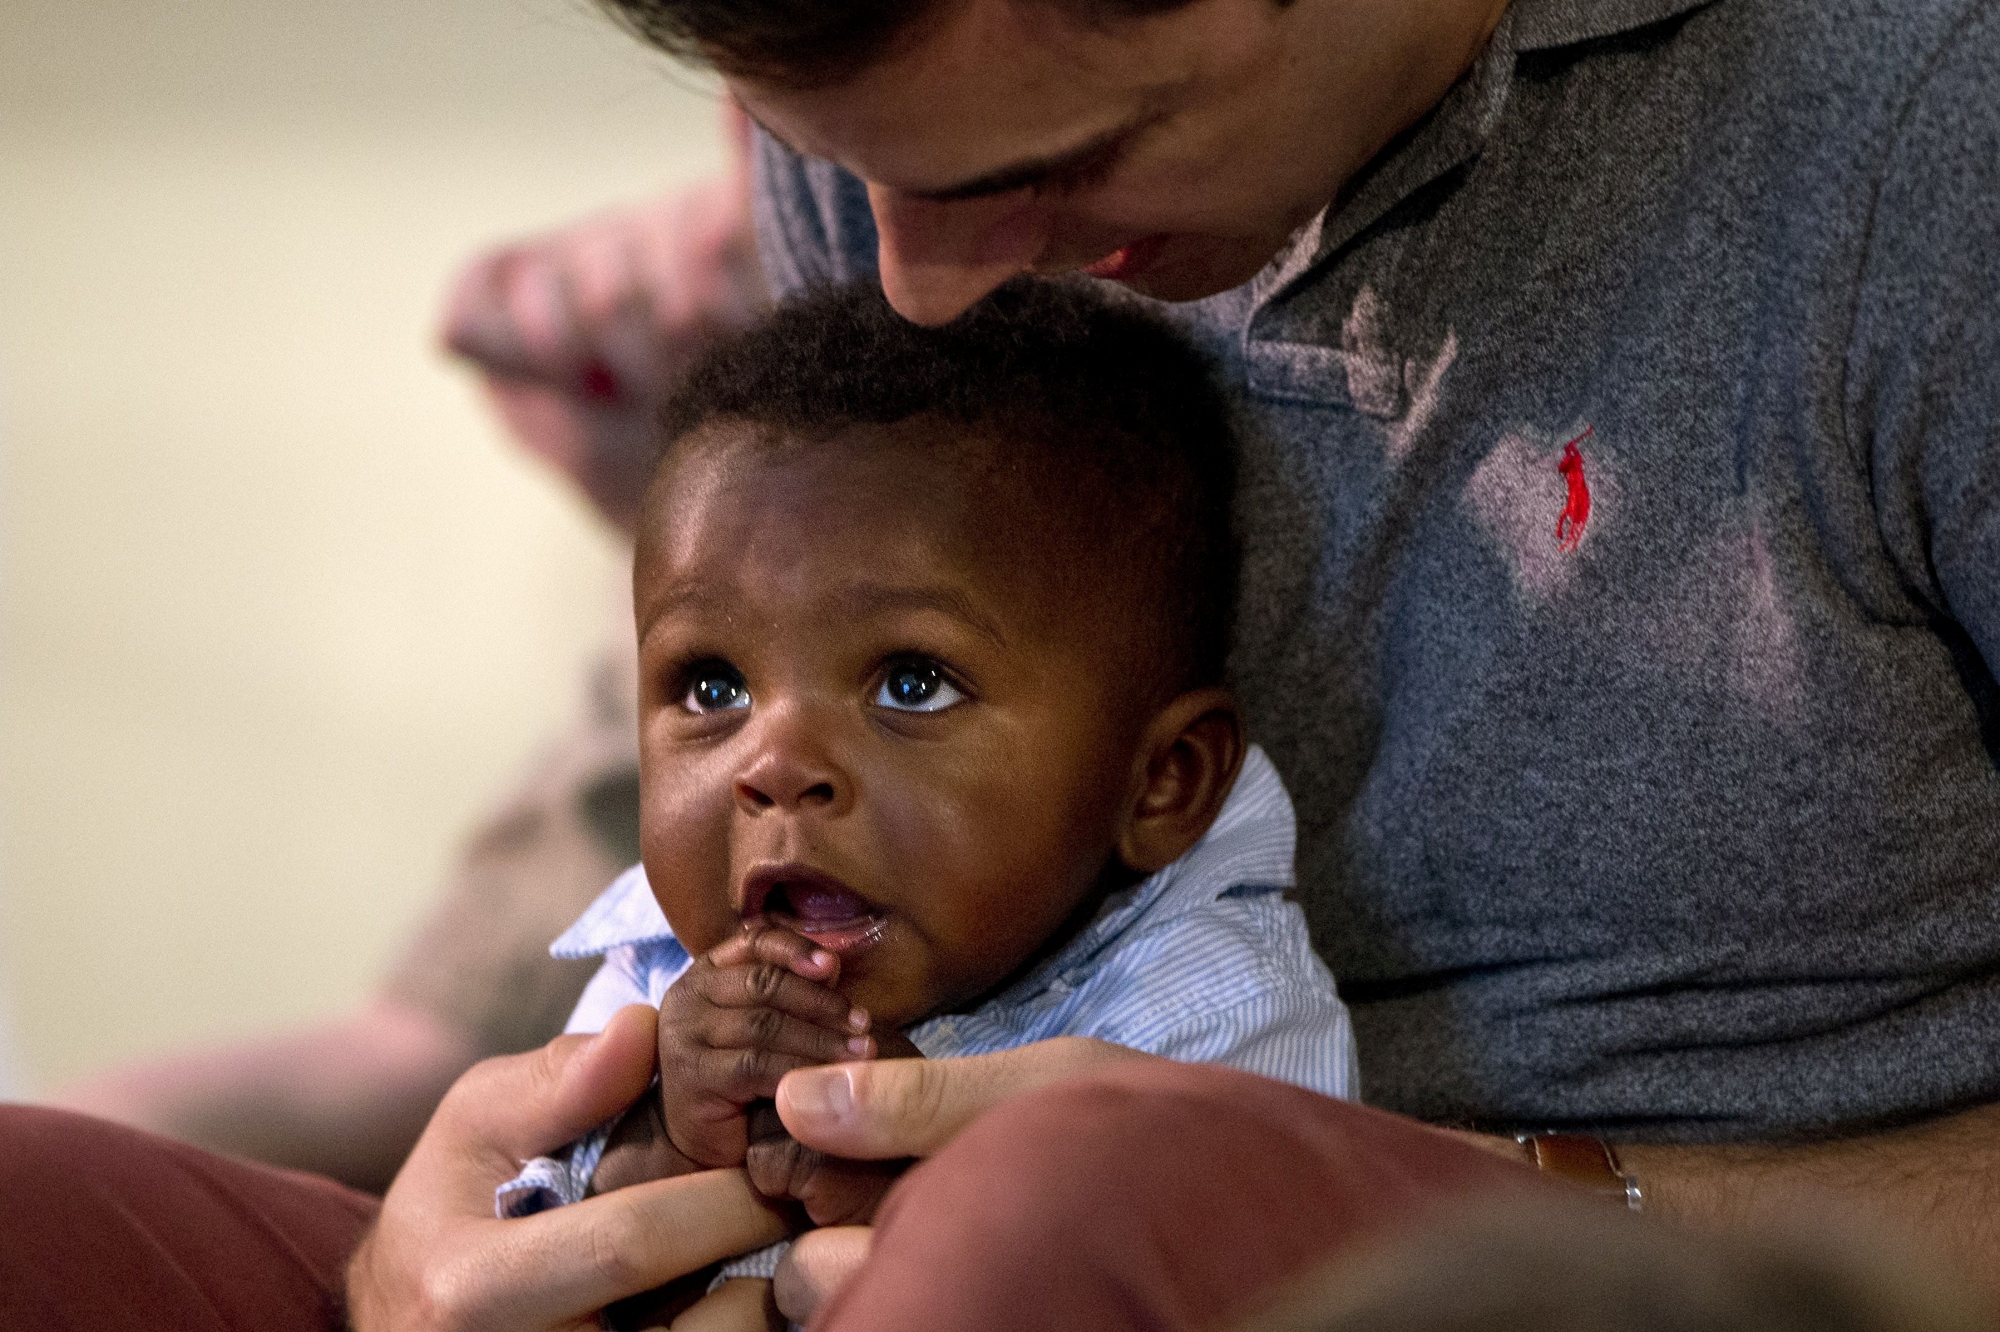 SOCIAL VALUES: Brooks Brunson holds his son's hands in prayer during "children's prayers" as the family attends church at Capitol Hill United Methodist Church in Washington, on Sunday, May 8, 2016. Married in 2013, Brooks Brunson and Gregg Pitts always knew they wanted to have a family together, and were delighted when they were able to start the adoption process for their son shortly after beginning to look for a match in 2015. The child's birth mother had no problem with a same-sex couple adopting the baby. "We're an interracial same-sex couple family," says Brunson, "But our day-to-day life is picking up dry cleaning, getting to work on time, making sure Thomas has his bottle prepared - we're the most boring people I know. But then when I take a step back I realize we are very unique. But I believe this is exactly where God wants me to be." The District of Columbia legalized gay marriage in 2010. (AP Photo/Jacquelyn Martin) USA ALLTAG